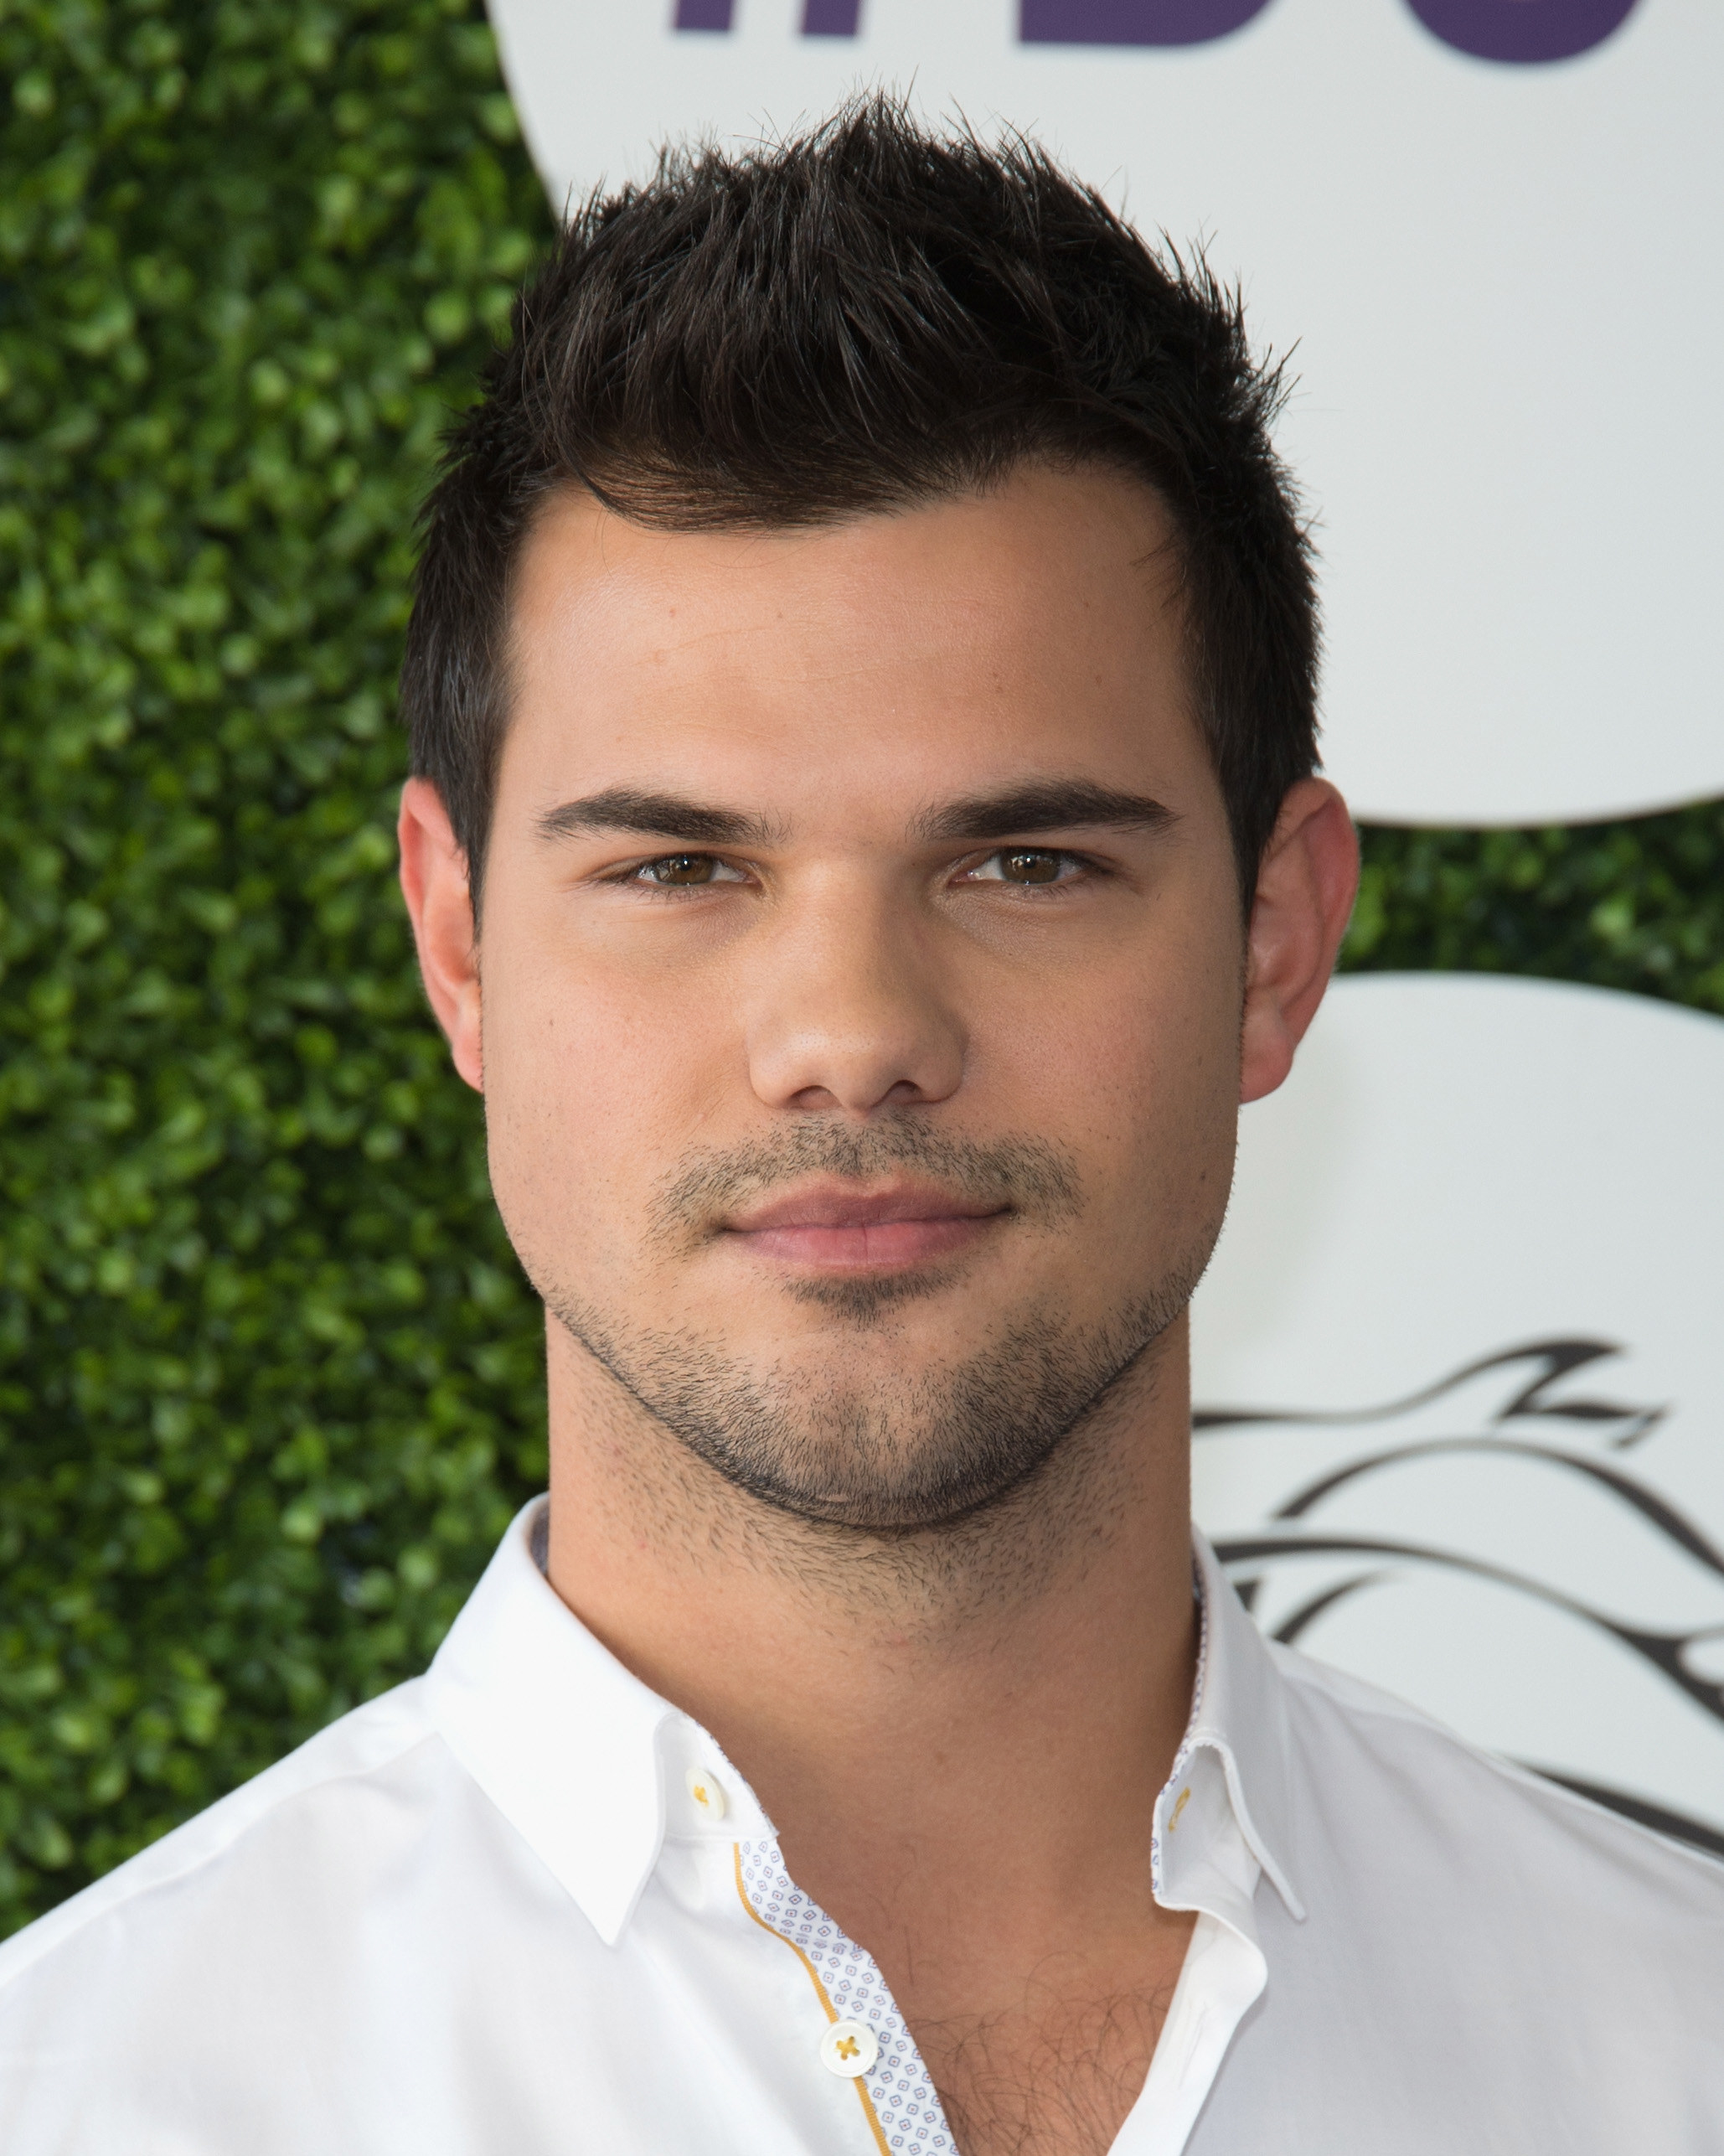 Taylor Lautner s Twilight Body Image Issues - 16